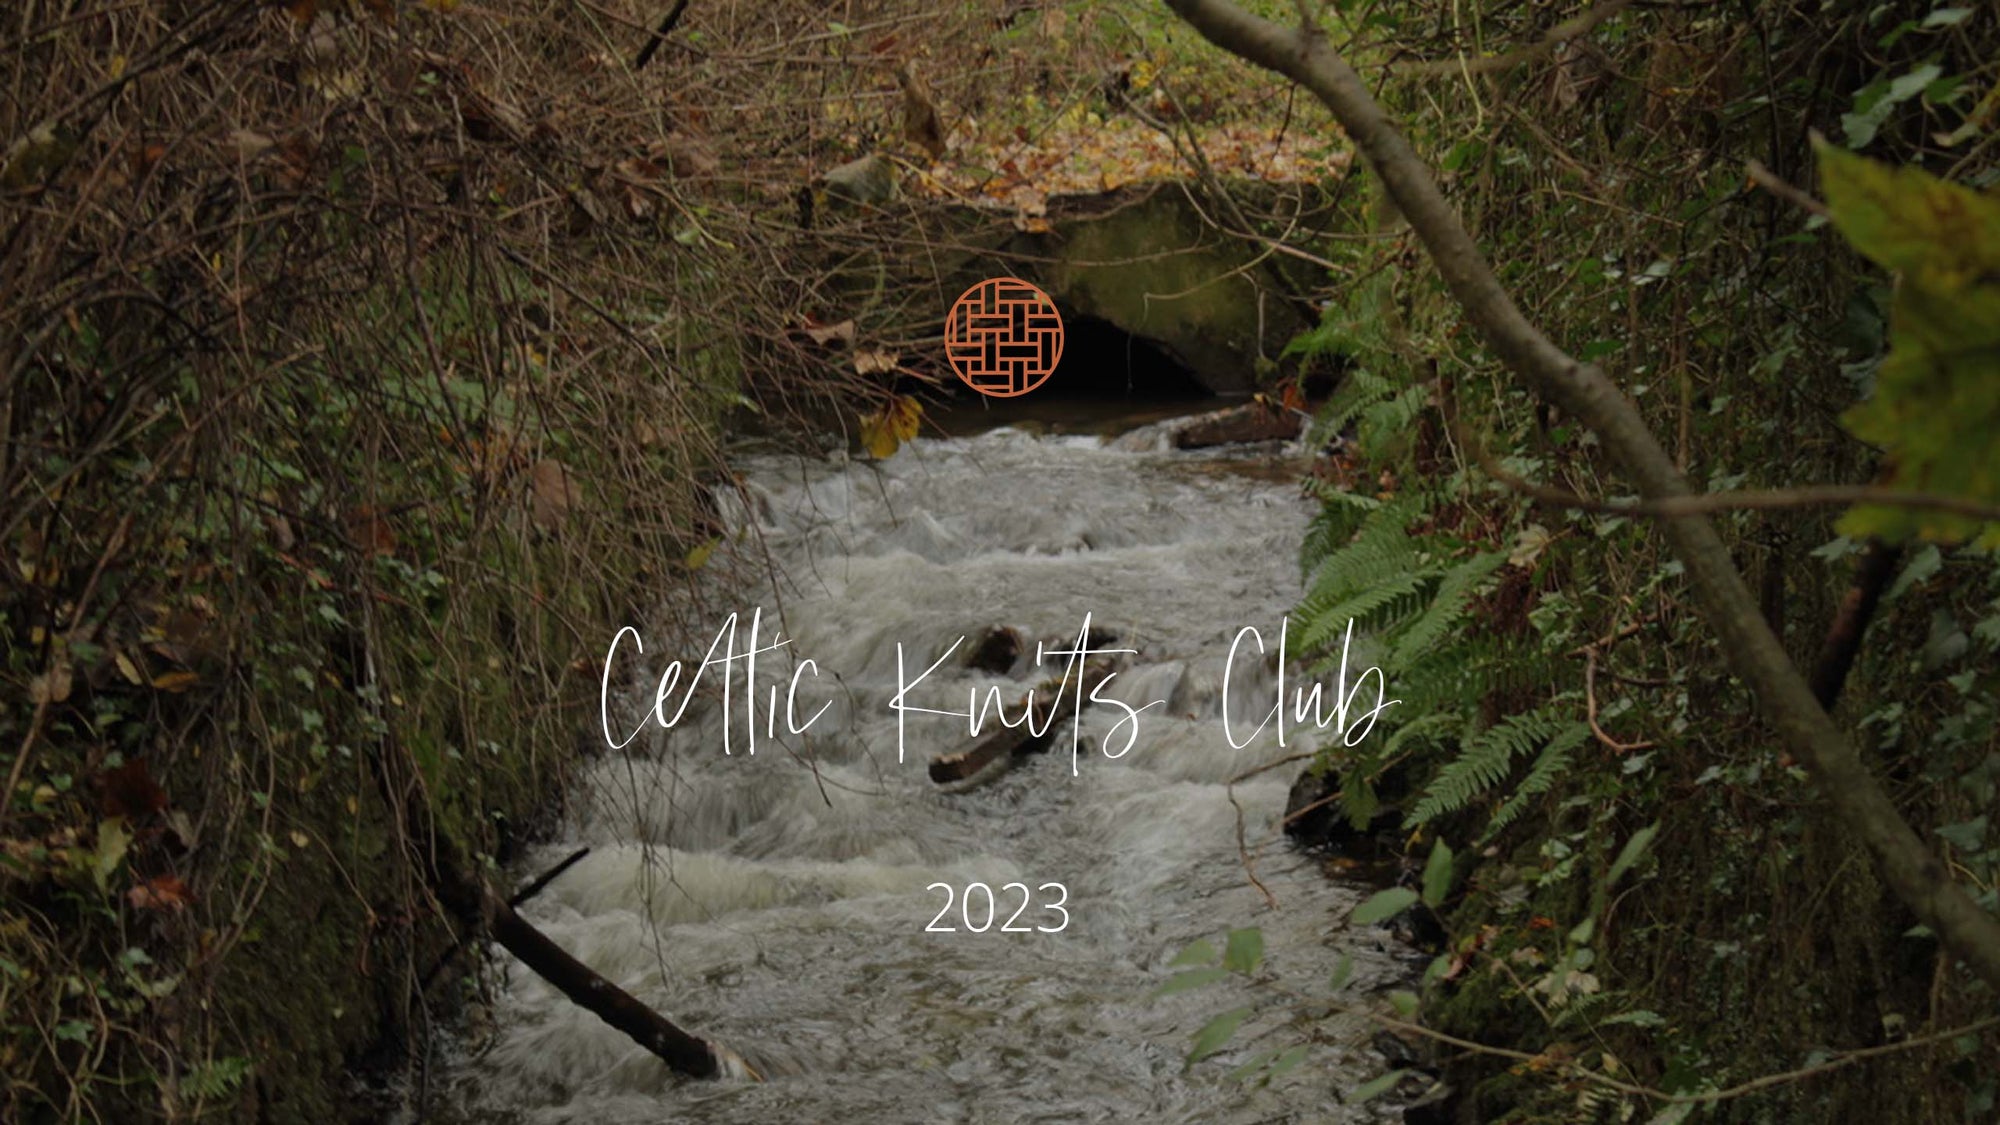 Celtic Knits Club banner on waterfall background